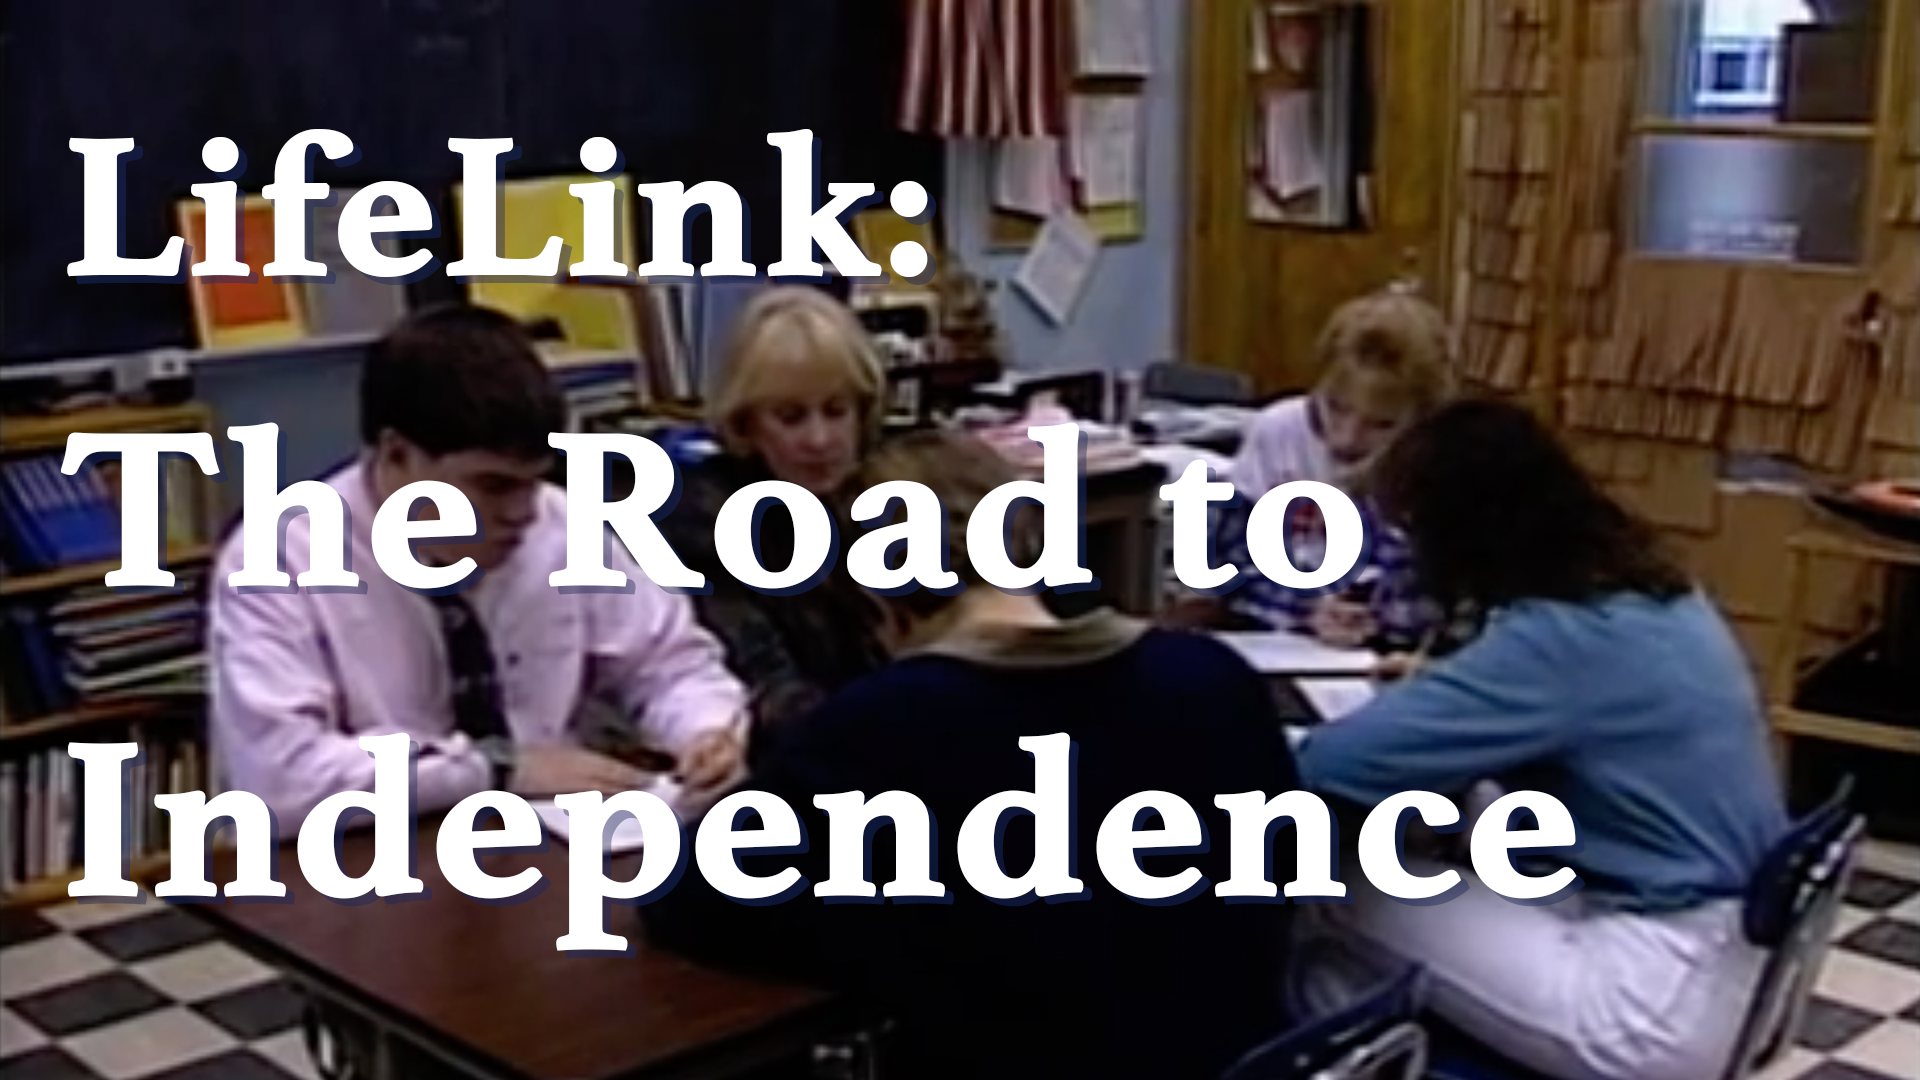 Learn about how LifeLink, a special education program founded in 1996, has provided students with a 'road to independence.'